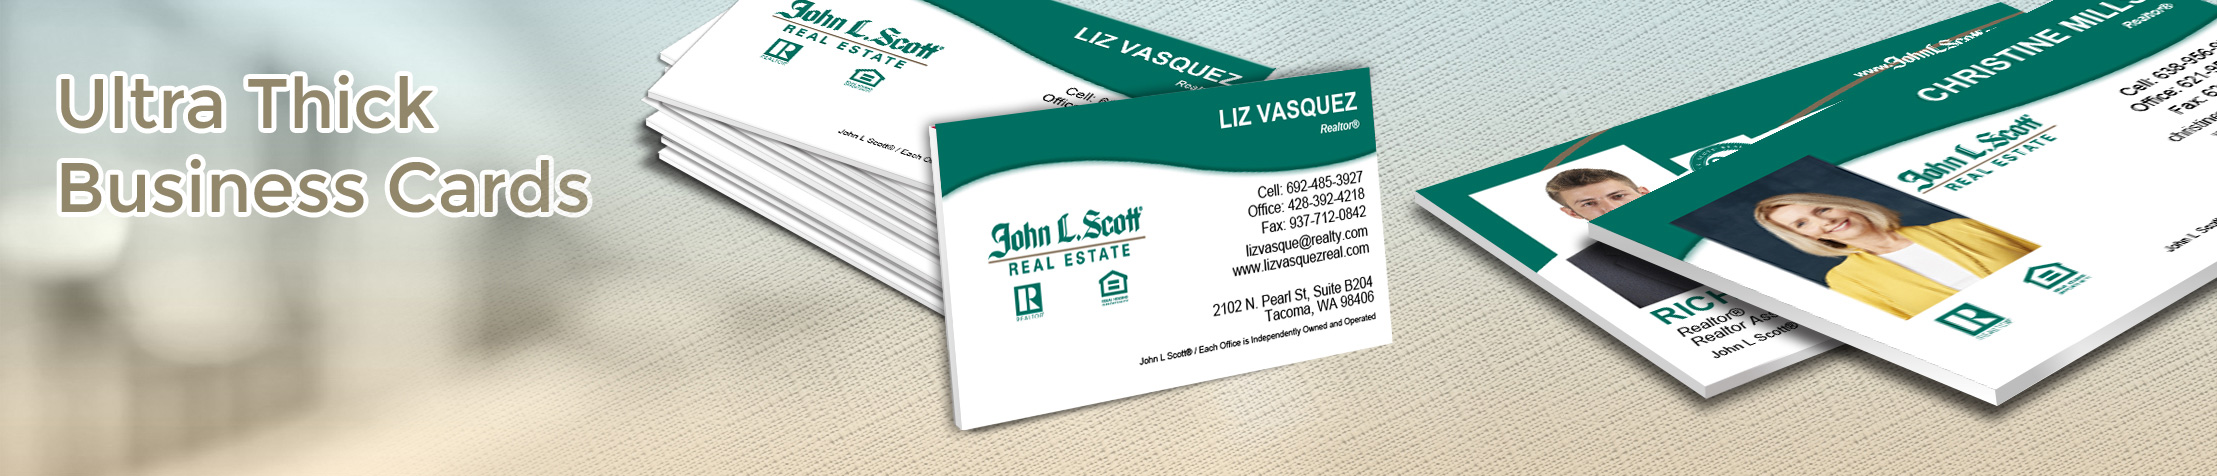 John L. Scott Real Estate Ultra Thick Business Cards - John L. Scott Real Estate - Luxury, Thick Stock Business Cards with a Matte Finish for Realtors | BestPrintBuy.com